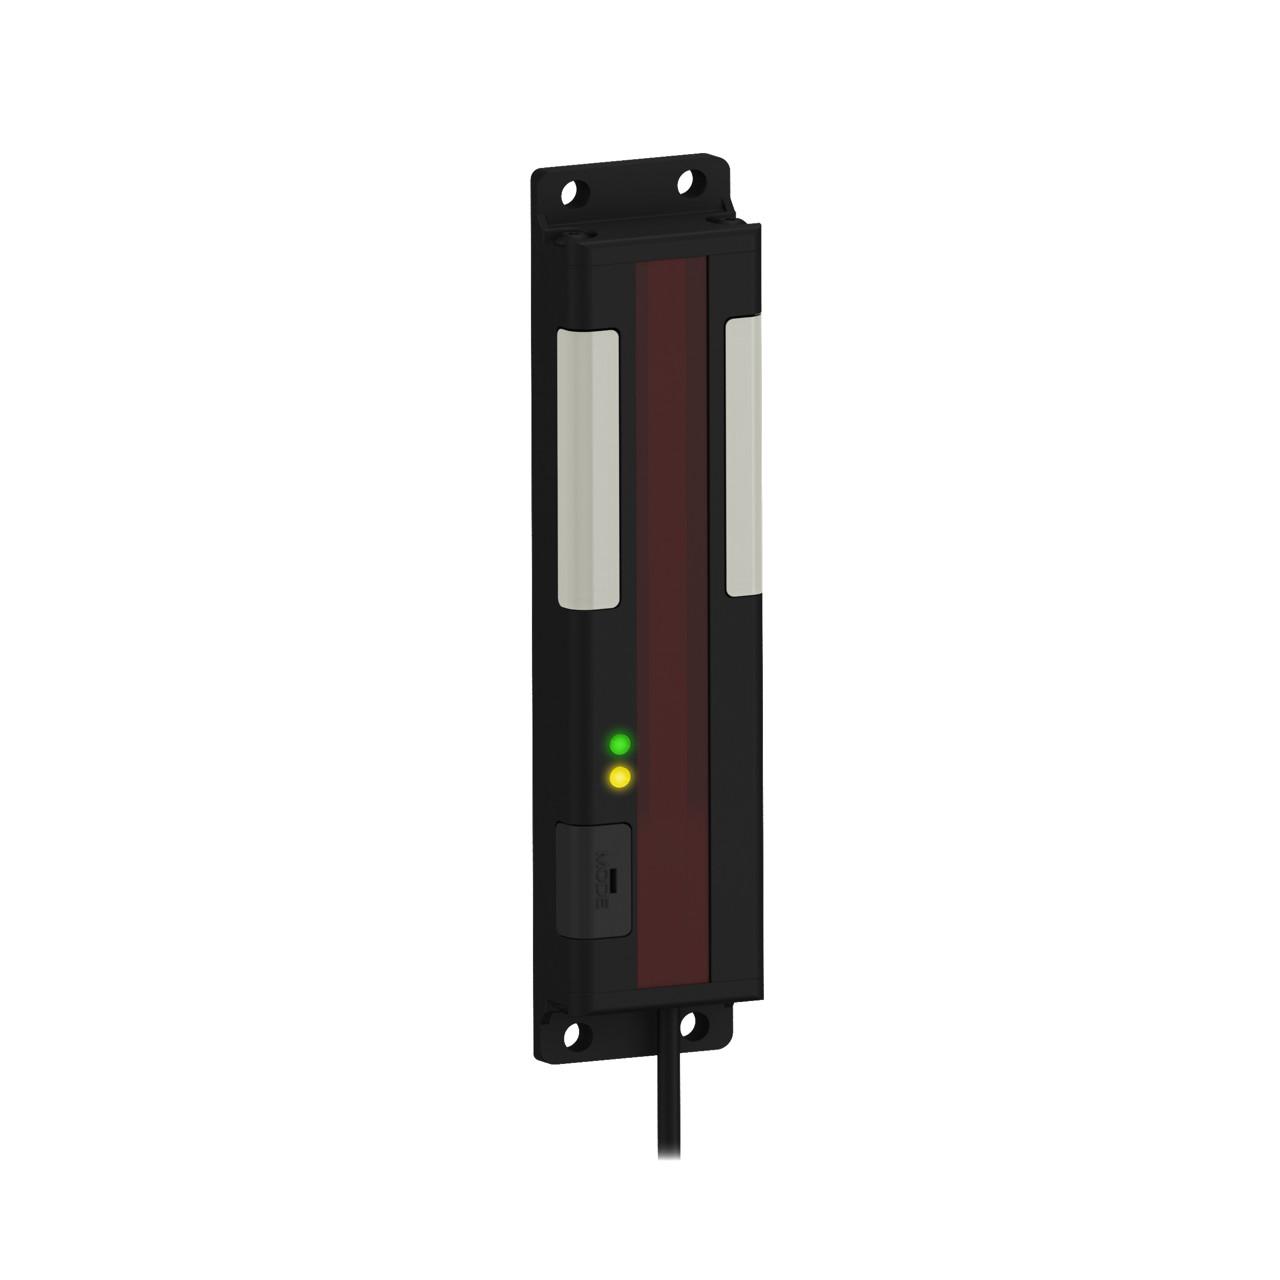 Banner PVA100N6E Flat-mount array optical sensor for error-proofing of bin handpicking operations - through-beam sensing emitter only - Banner Engineering (PVA) - Part #51925 - Array height 6.5" / 100mm (5 beams) - Supply voltage 12-30Vdc (12Vdc-24Vdc nom.) - Pre-wired wi